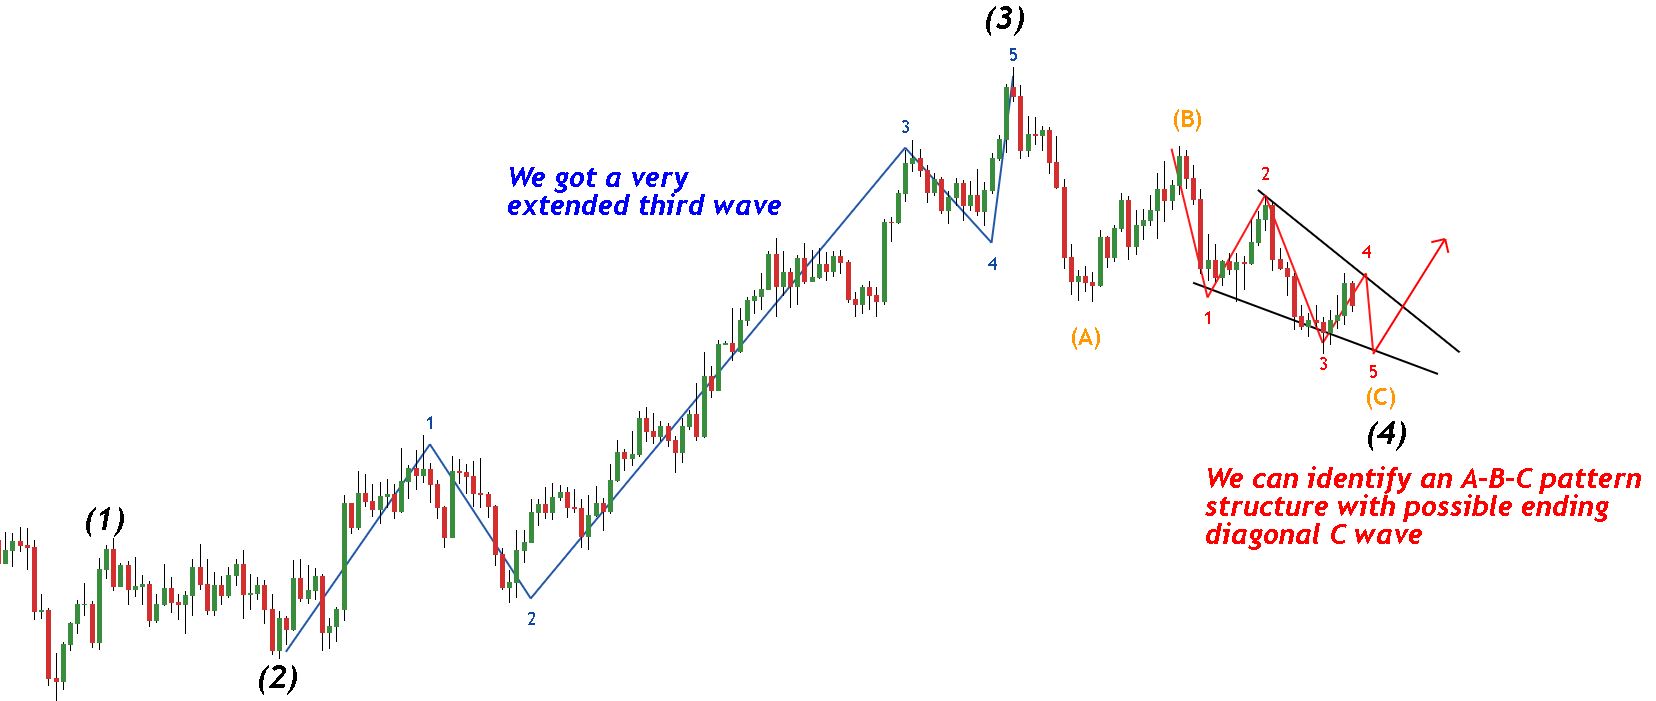 Identifying the Ending Diagonal structure on chart